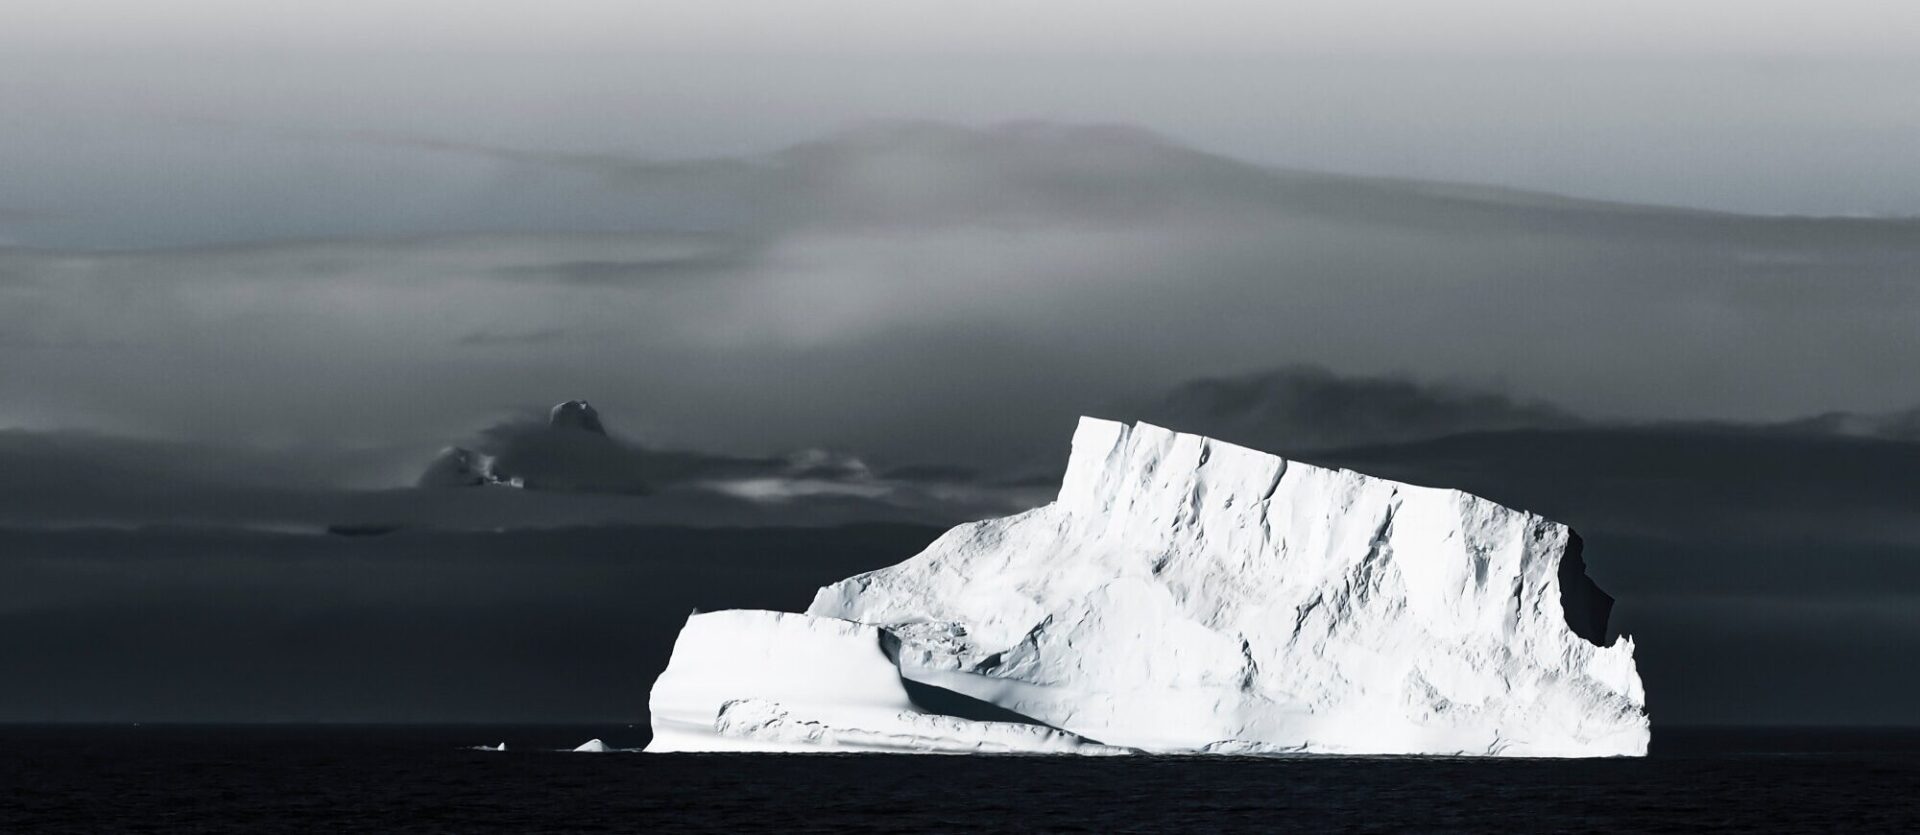 A massive iceberg drifts in front of a distant mountain range in the Antarctic Peninsula under the morning mist.